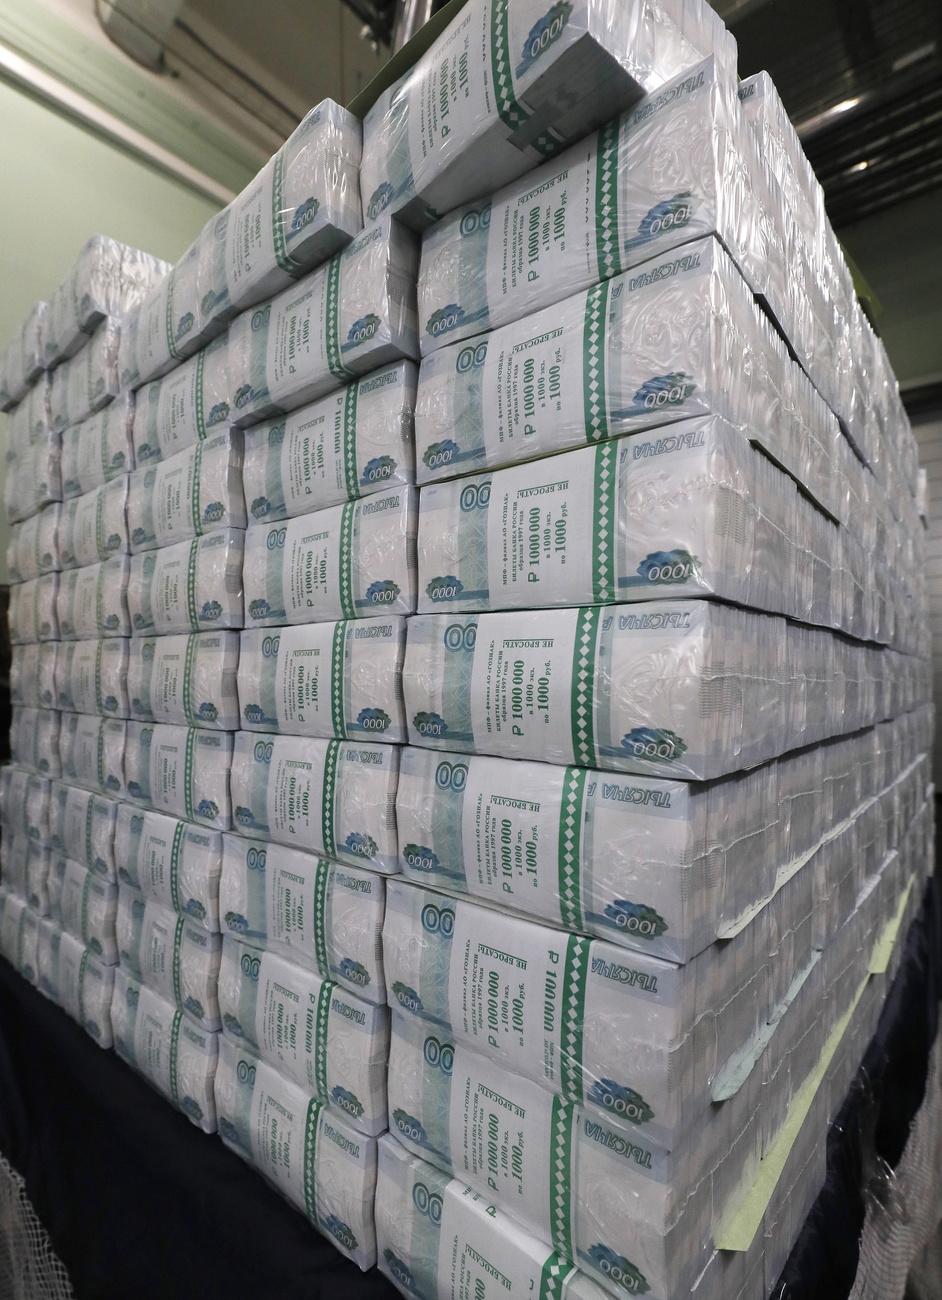 Multiple stacks of Russian banknotes, printed and bound in plastic.